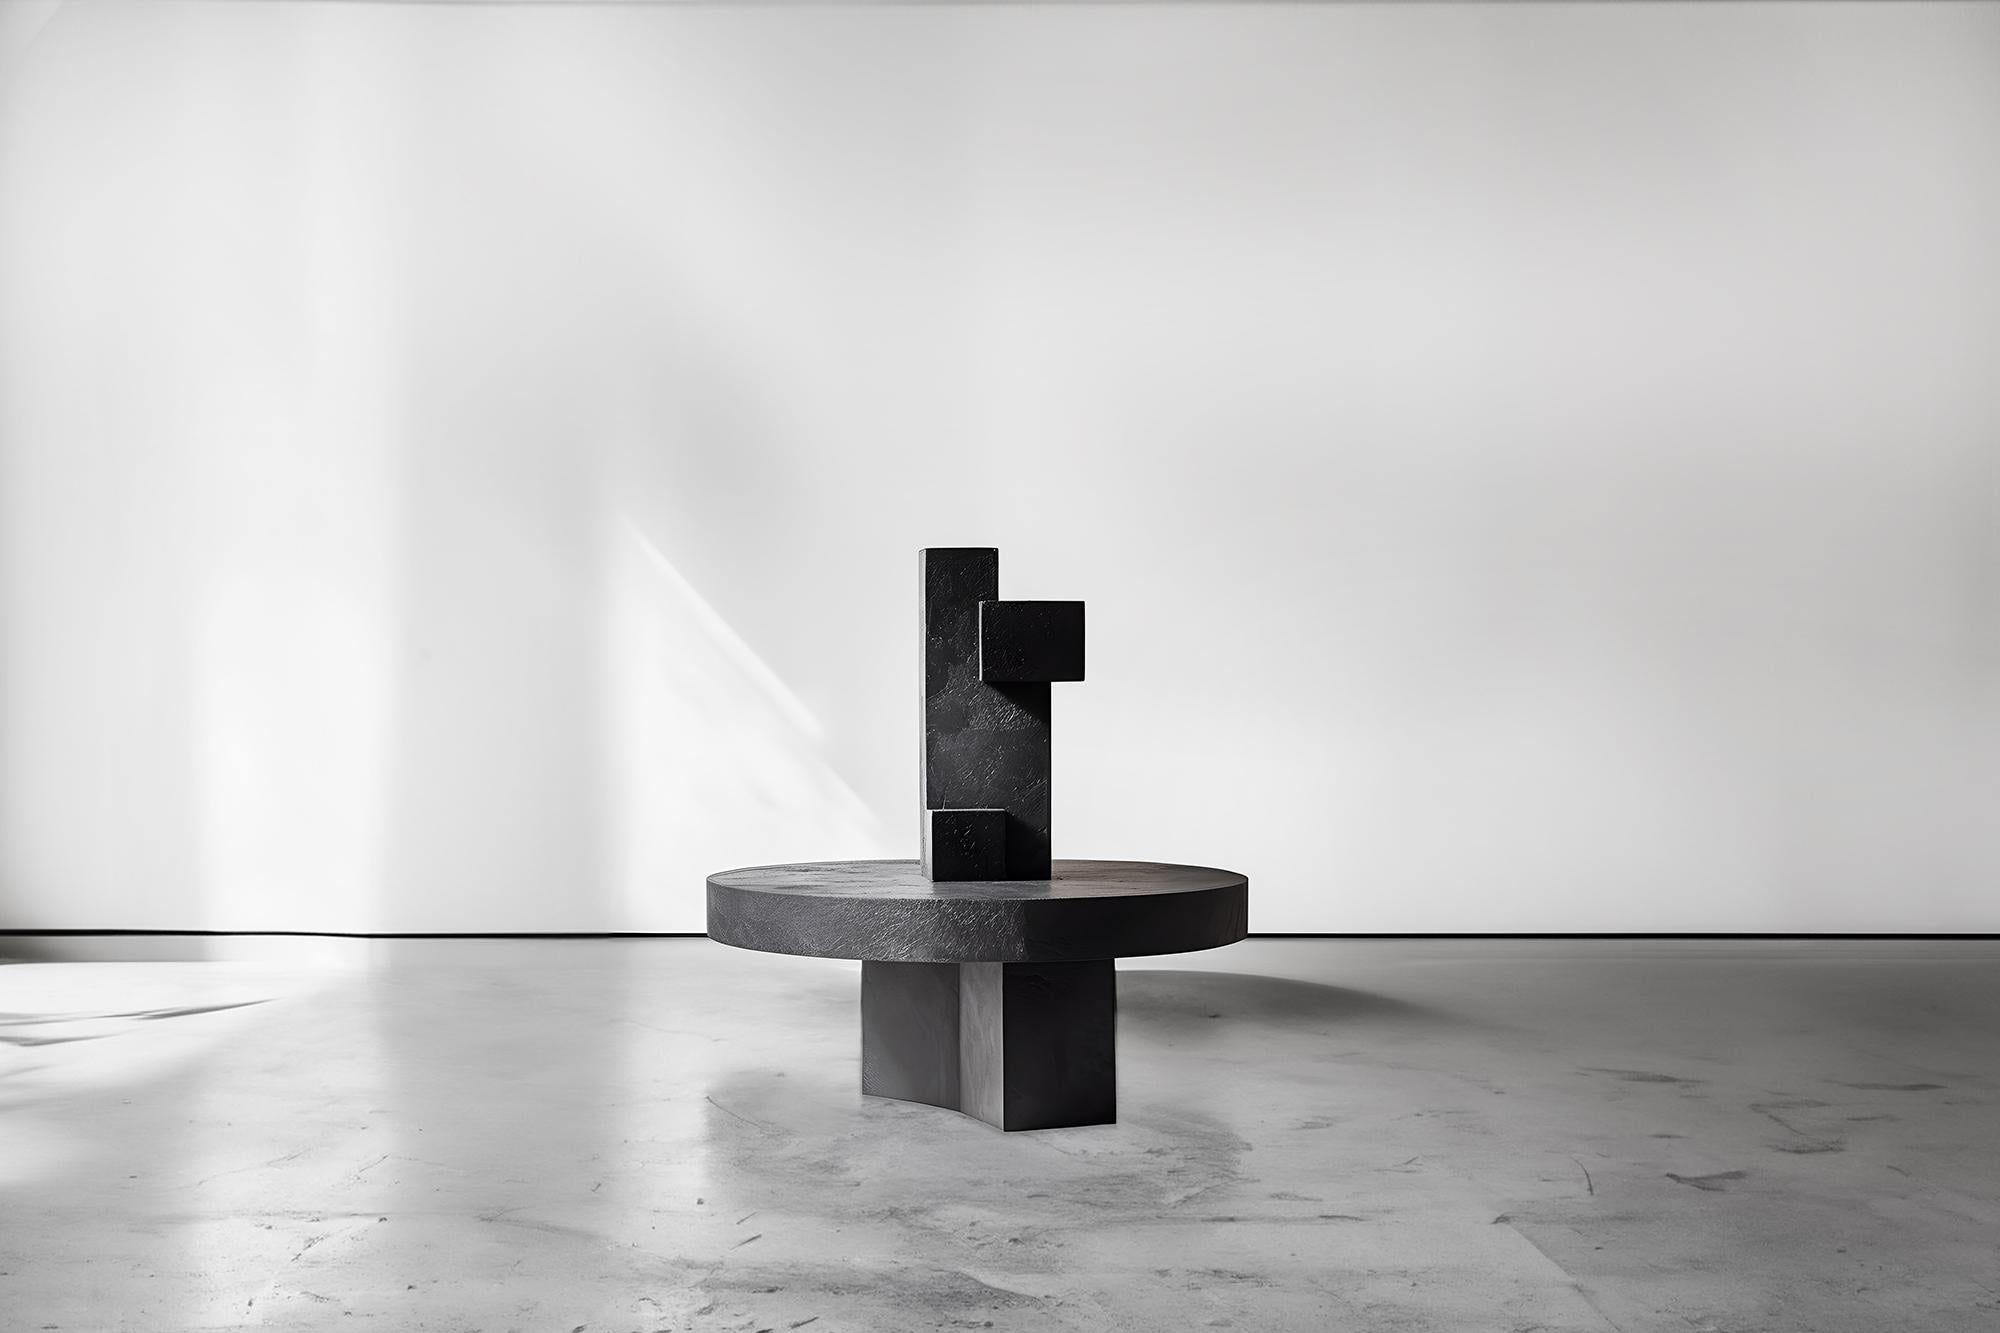 Unseen Force #1 Joel Escalona's Solid Oak Table, Art-Inspired Design
——
Sculptural coffee table made of solid wood with a natural water-based or carbonized finish. Due to the nature of the production process, each piece may vary in grain, texture,